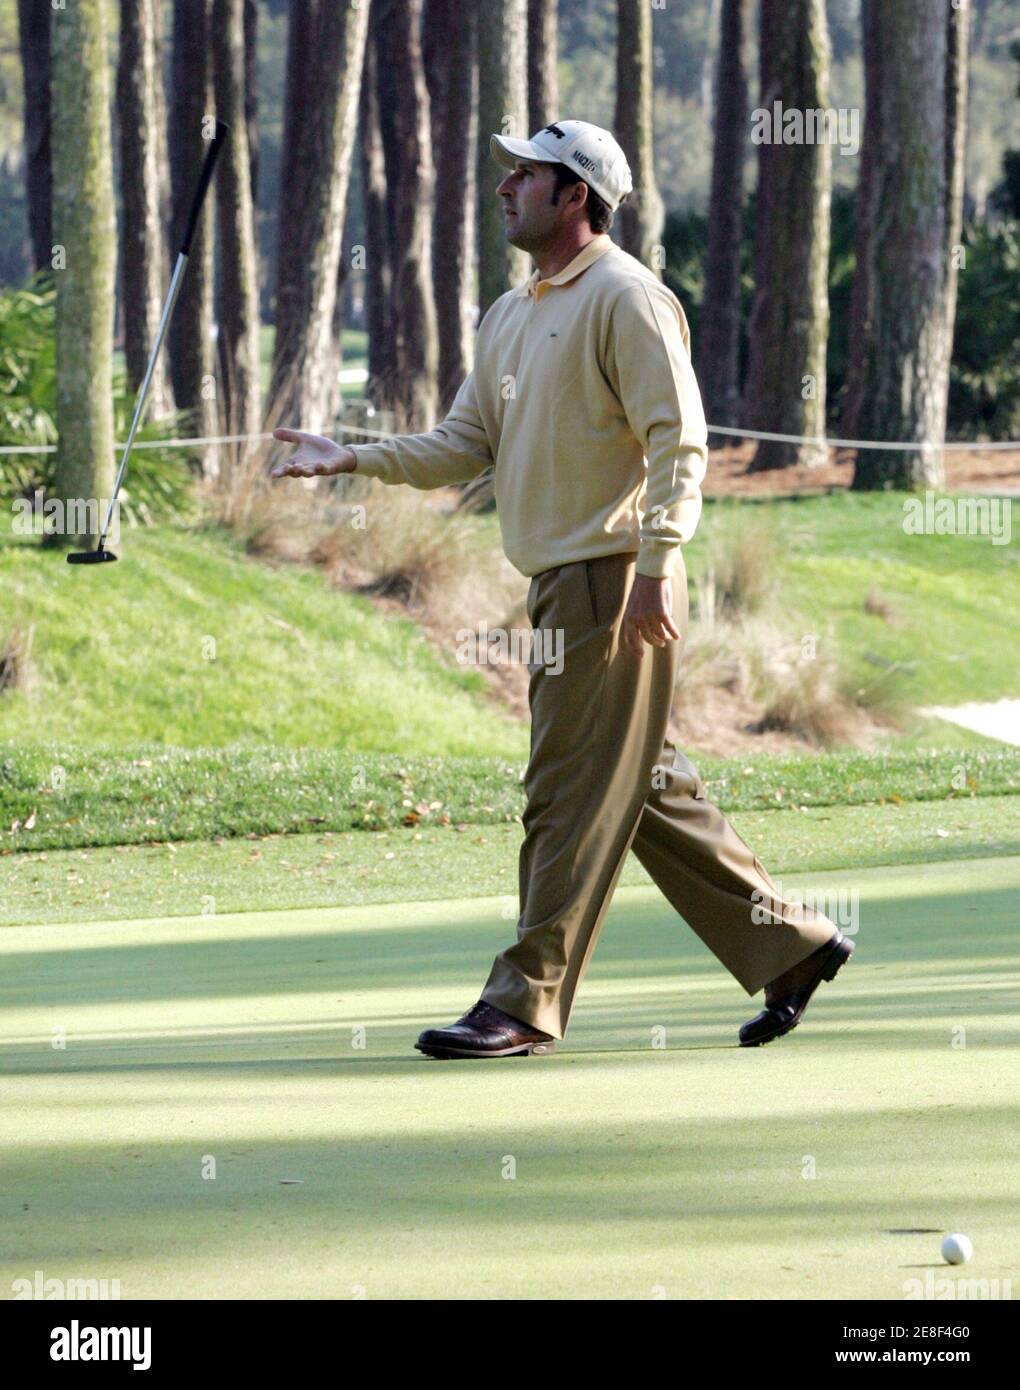 Jose Maria Olazabal of Spain tosses his club after missing a putt on the 10th green during the second round of the Players Championship golf tournament in Ponte Vedra Beach, Florida March 24, 2006. REUTERS/Rick Fowler Stock Photo